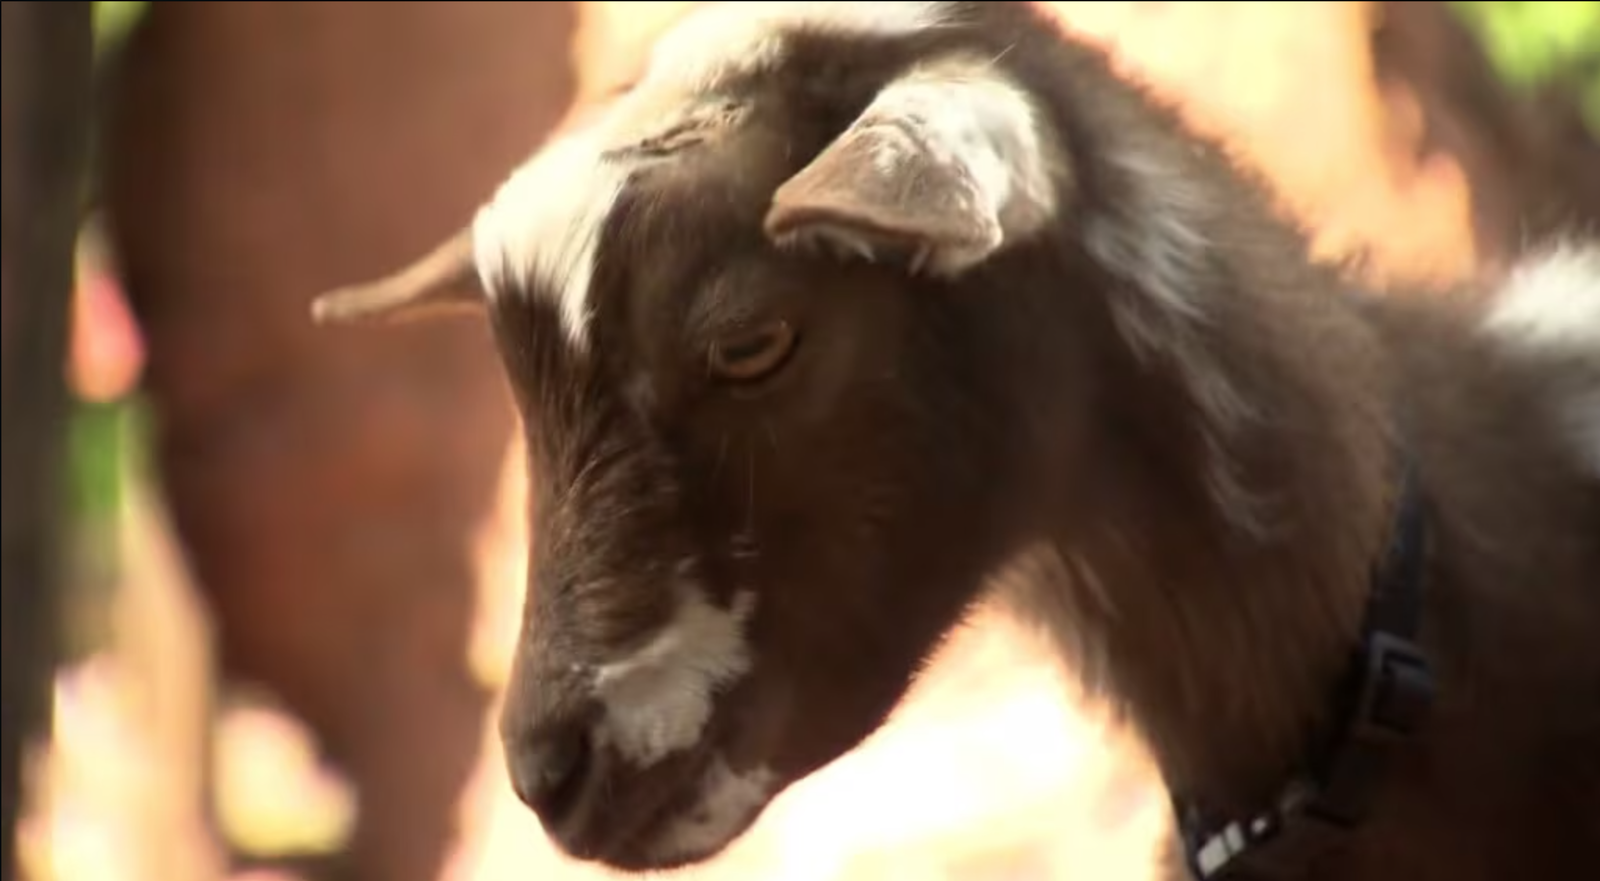 Guests could visit goats, sheep, and more at the retired Big Thunder Ranch petting zoo area.